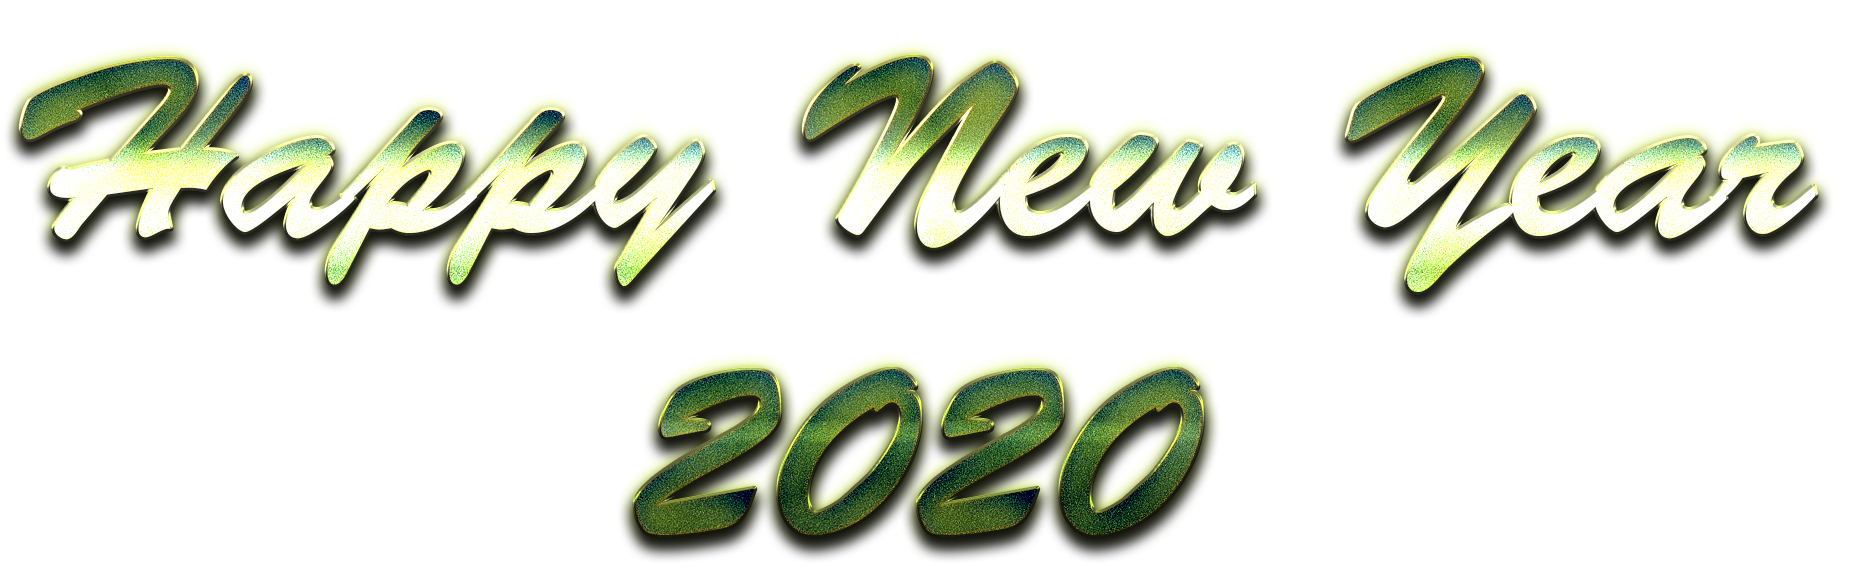 Happy New Year 2020 PNG Photo